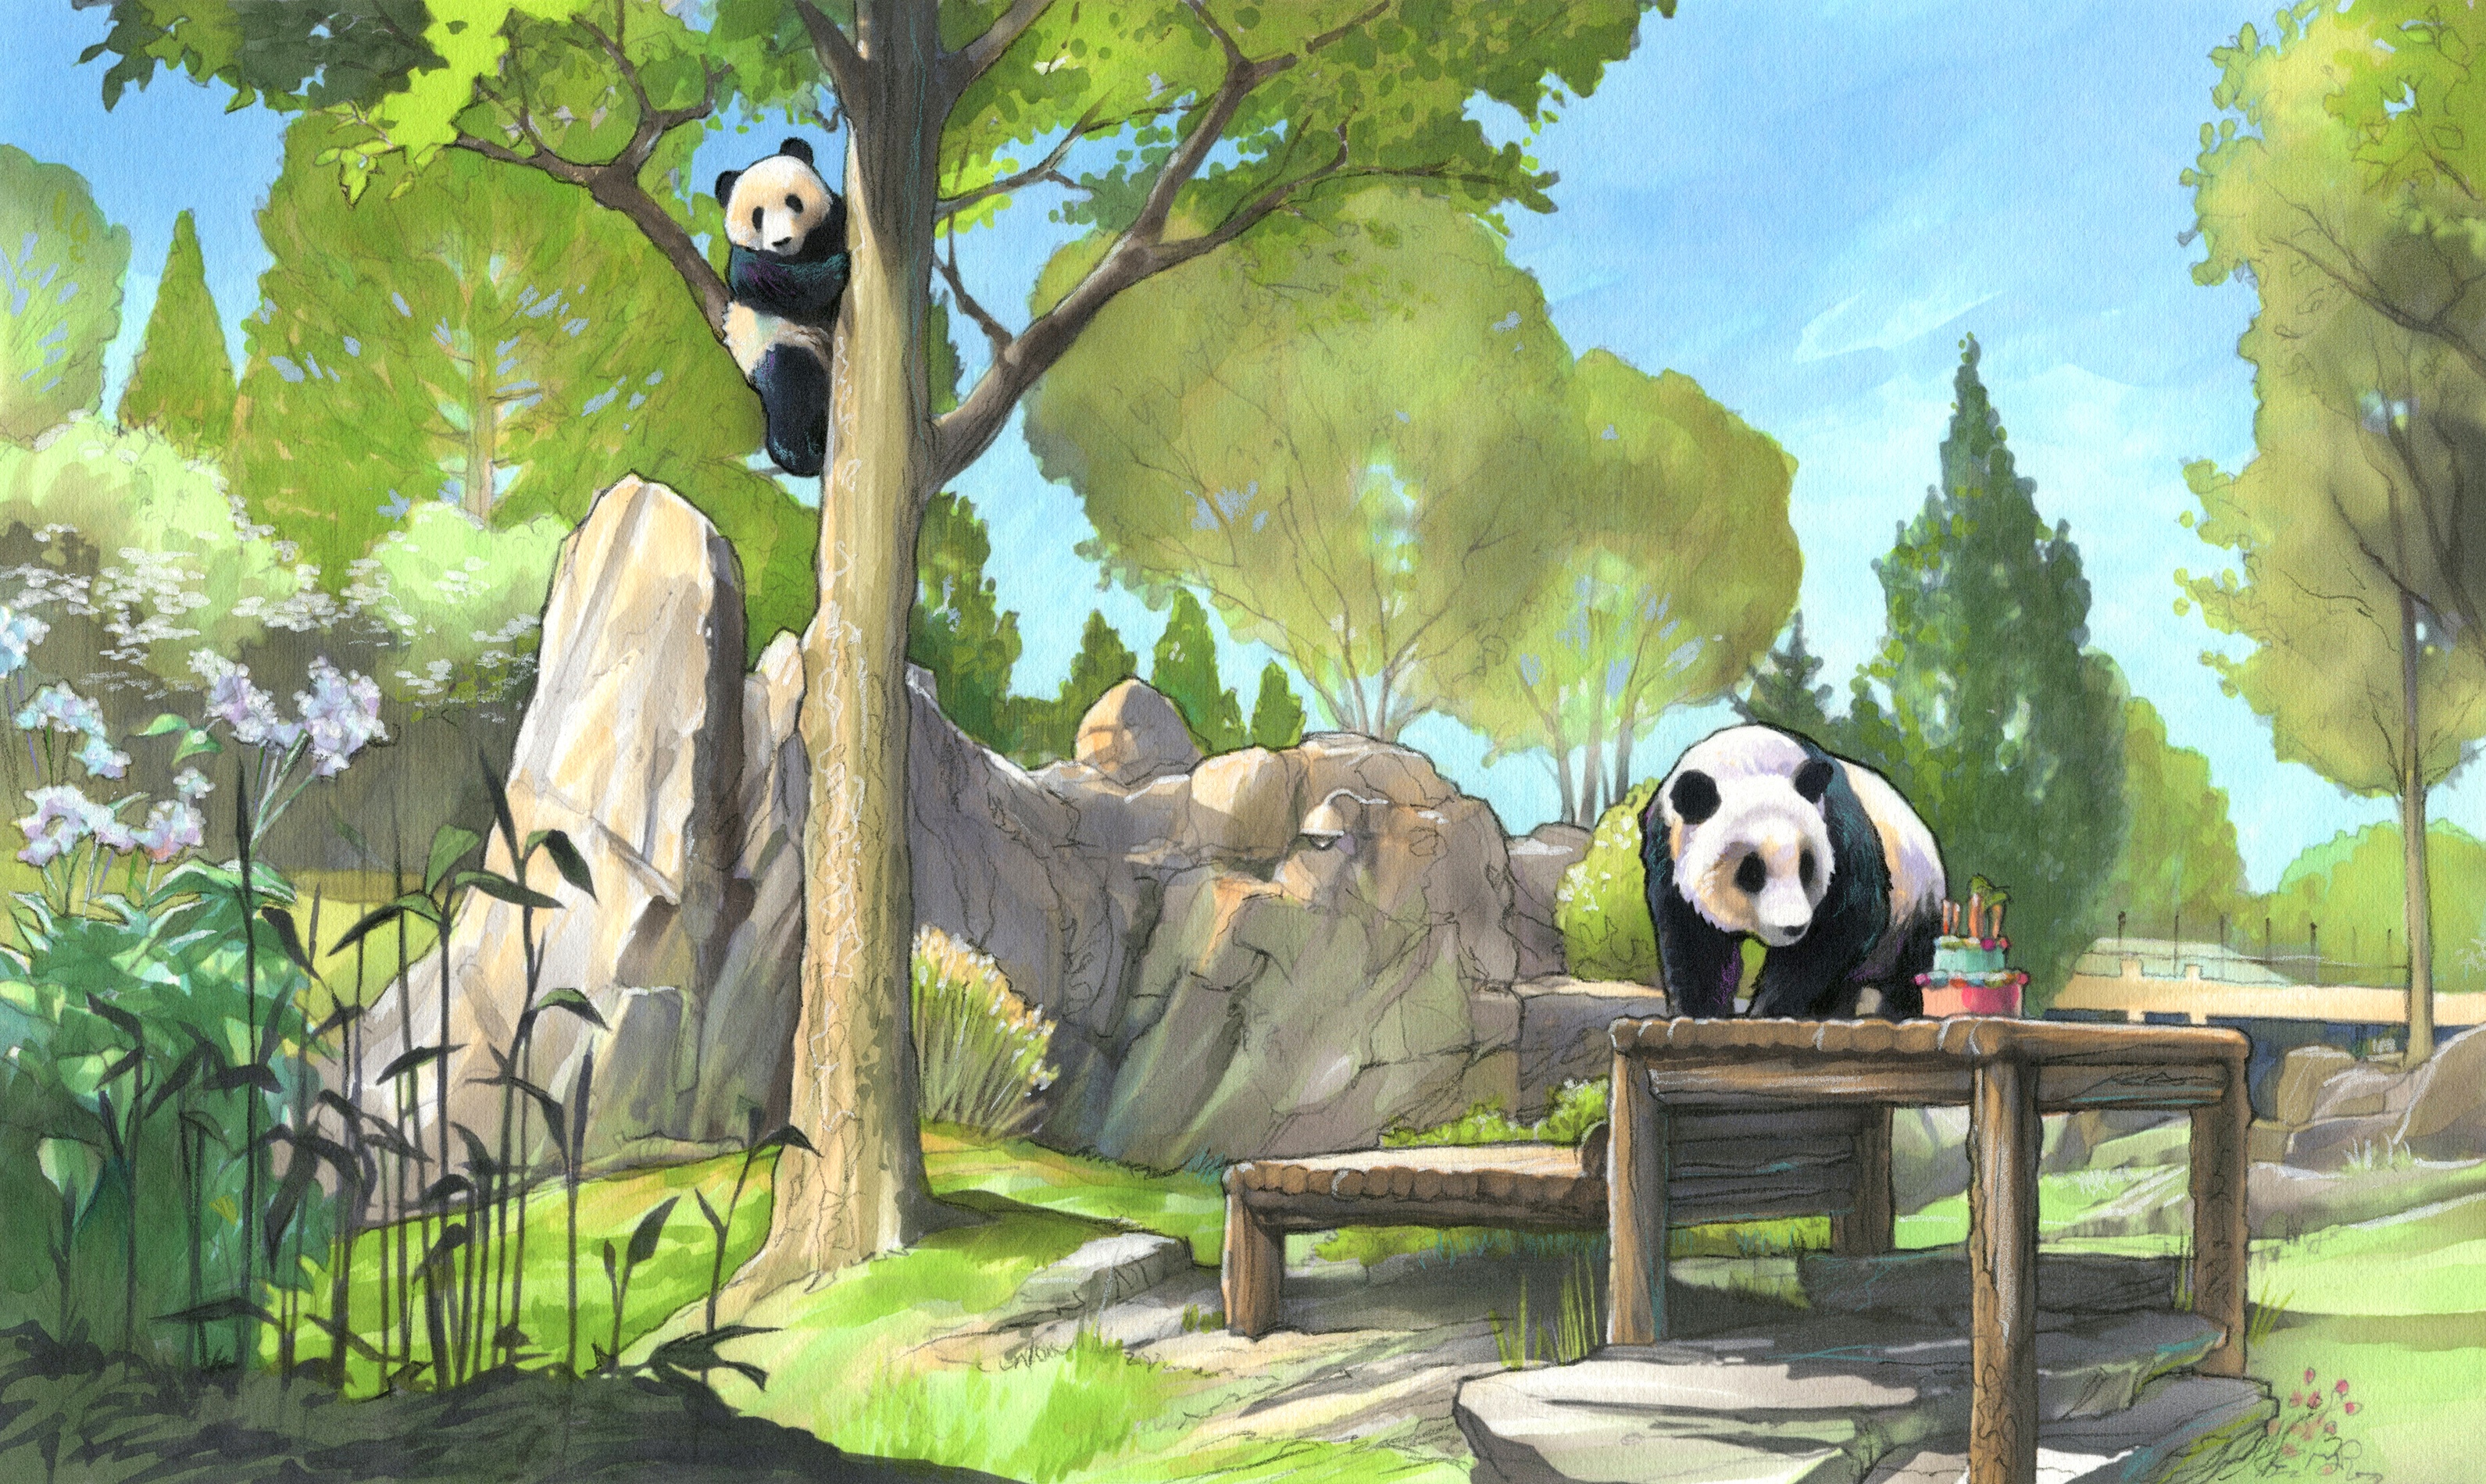 Illustration of the outdoor habitat of the Zoo's giant pandas.